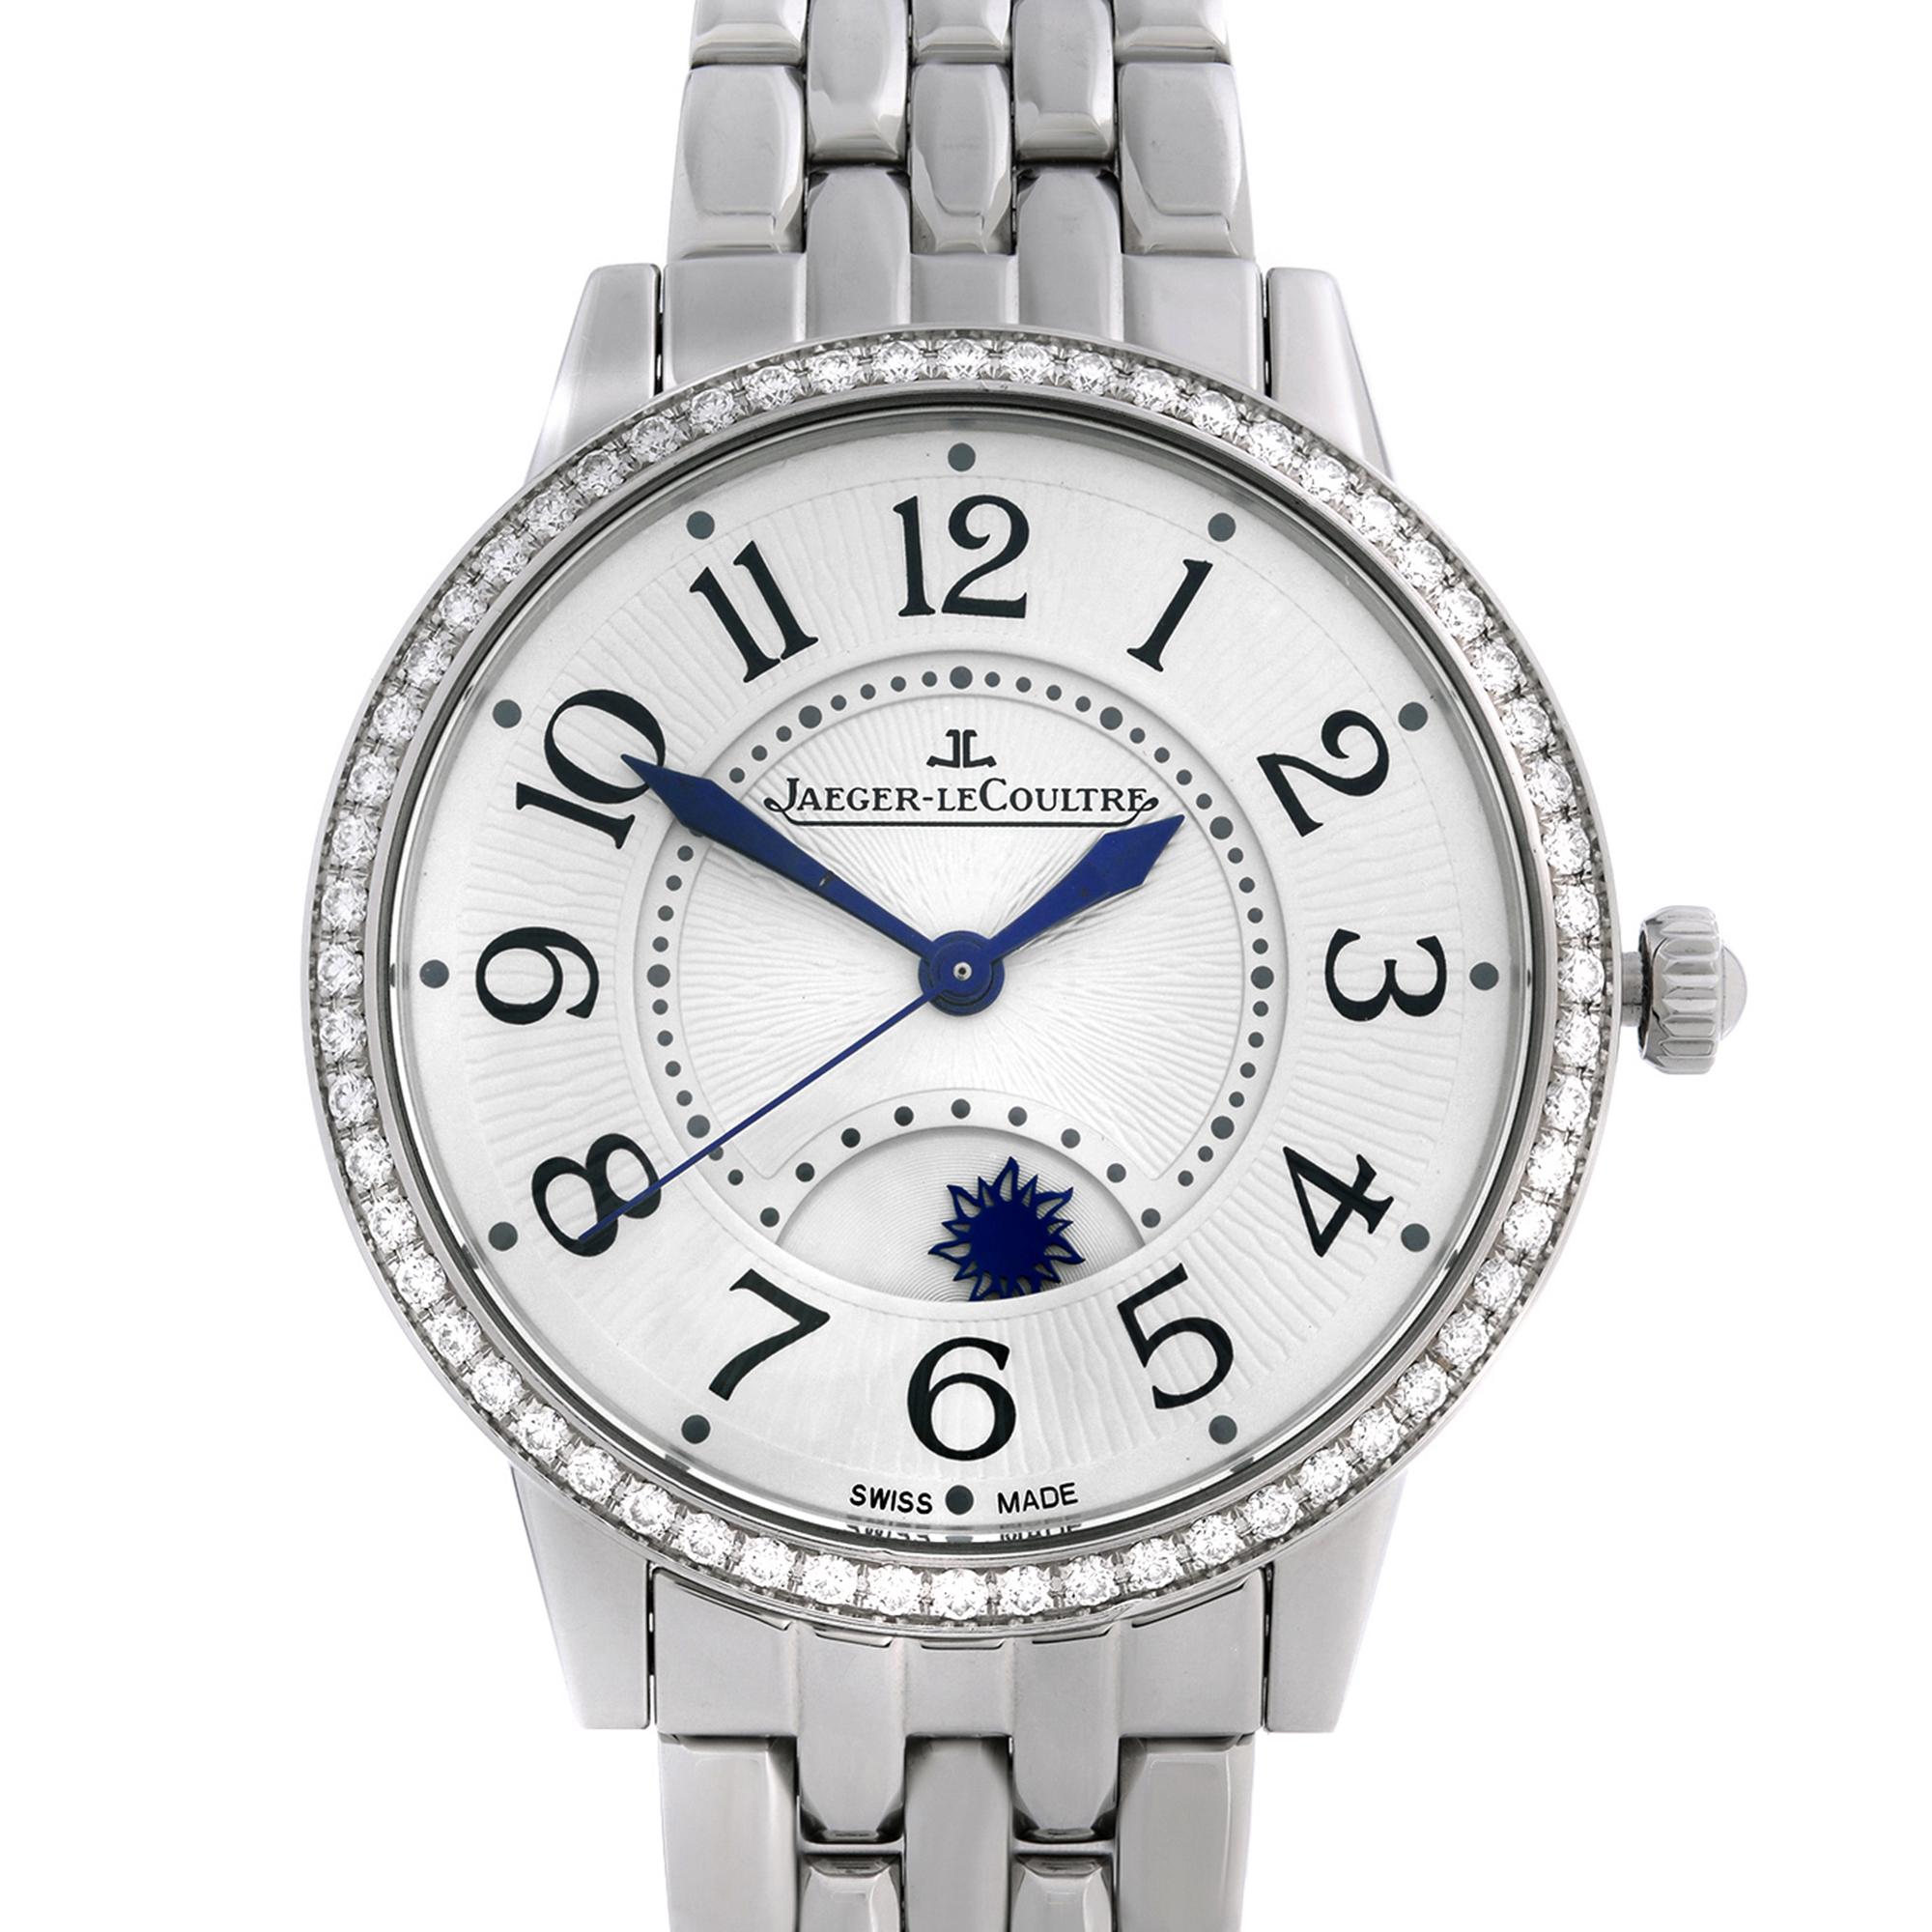 Unworn Jaeger-LeCoultre Rendez-Vous Steel Diamond Bezel Automatic Ladies Watch. This Beautiful Timepiece Features: Silver-Tone Stainless Steel Case with a Silver-Tone Stainless Steel Bracelet. Fixed Silver-Tone Bezel with 60 Diamond Set, Silver